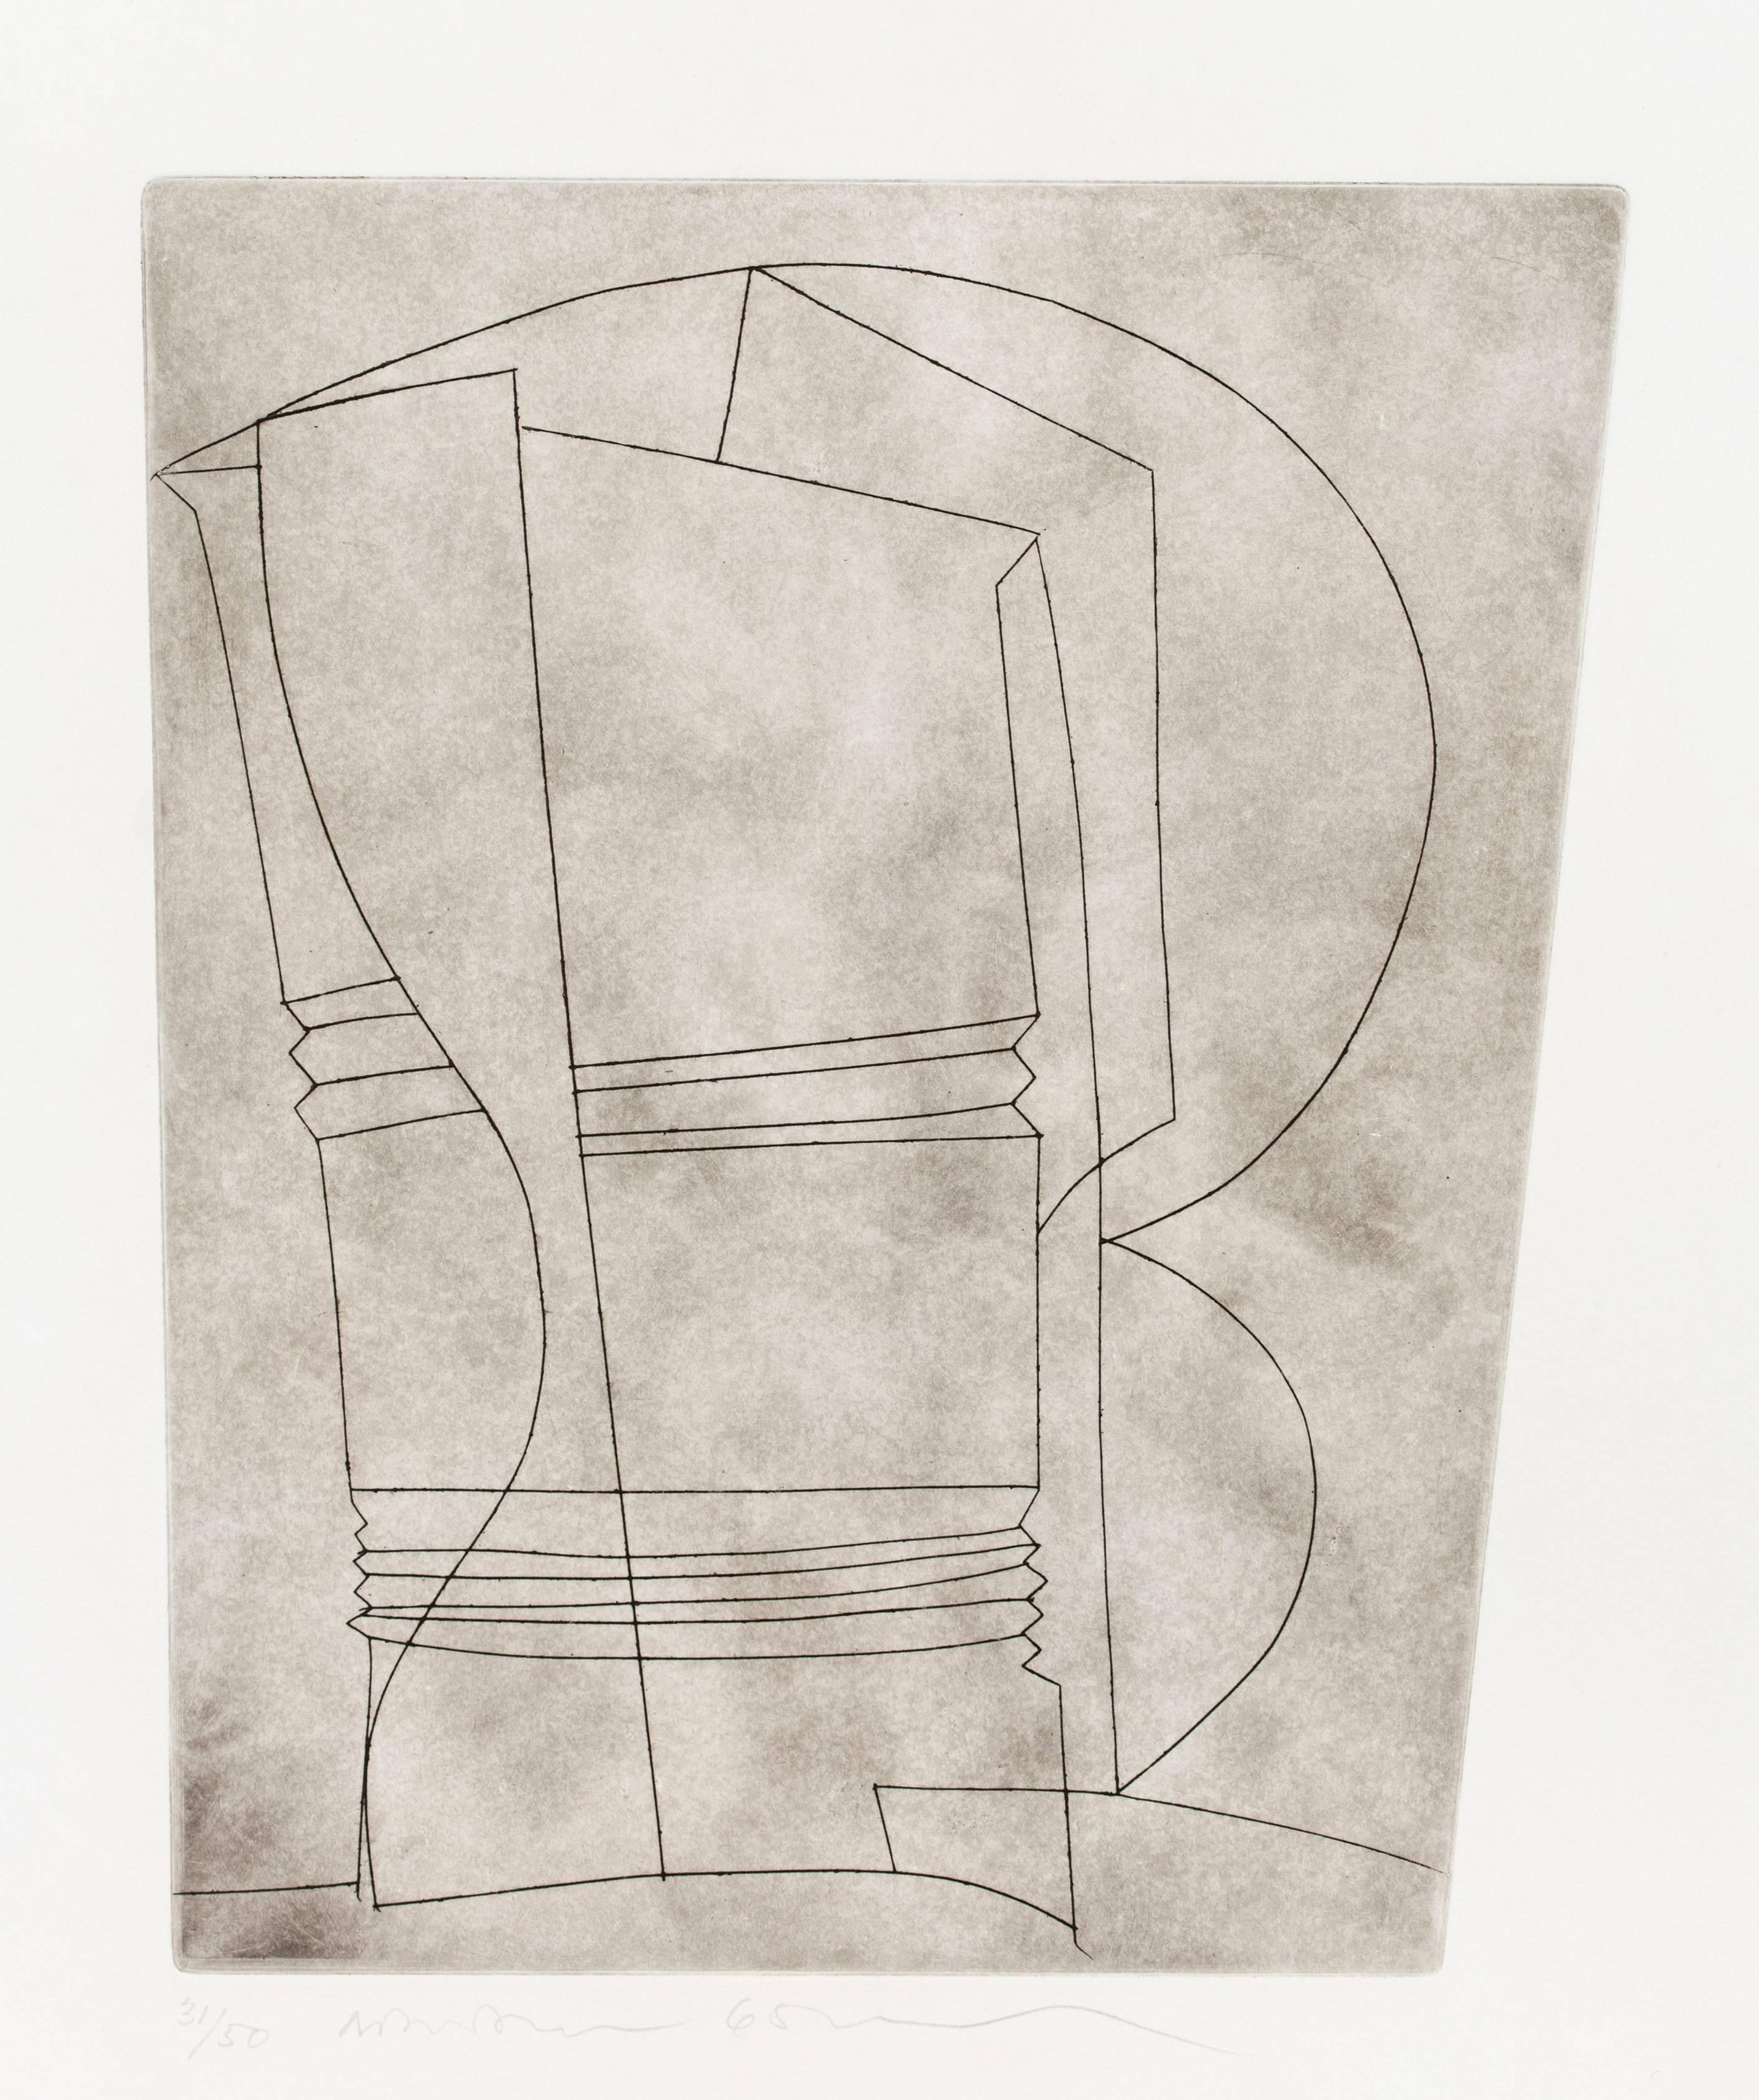 Still Life with Curves - Print by Ben Nicholson